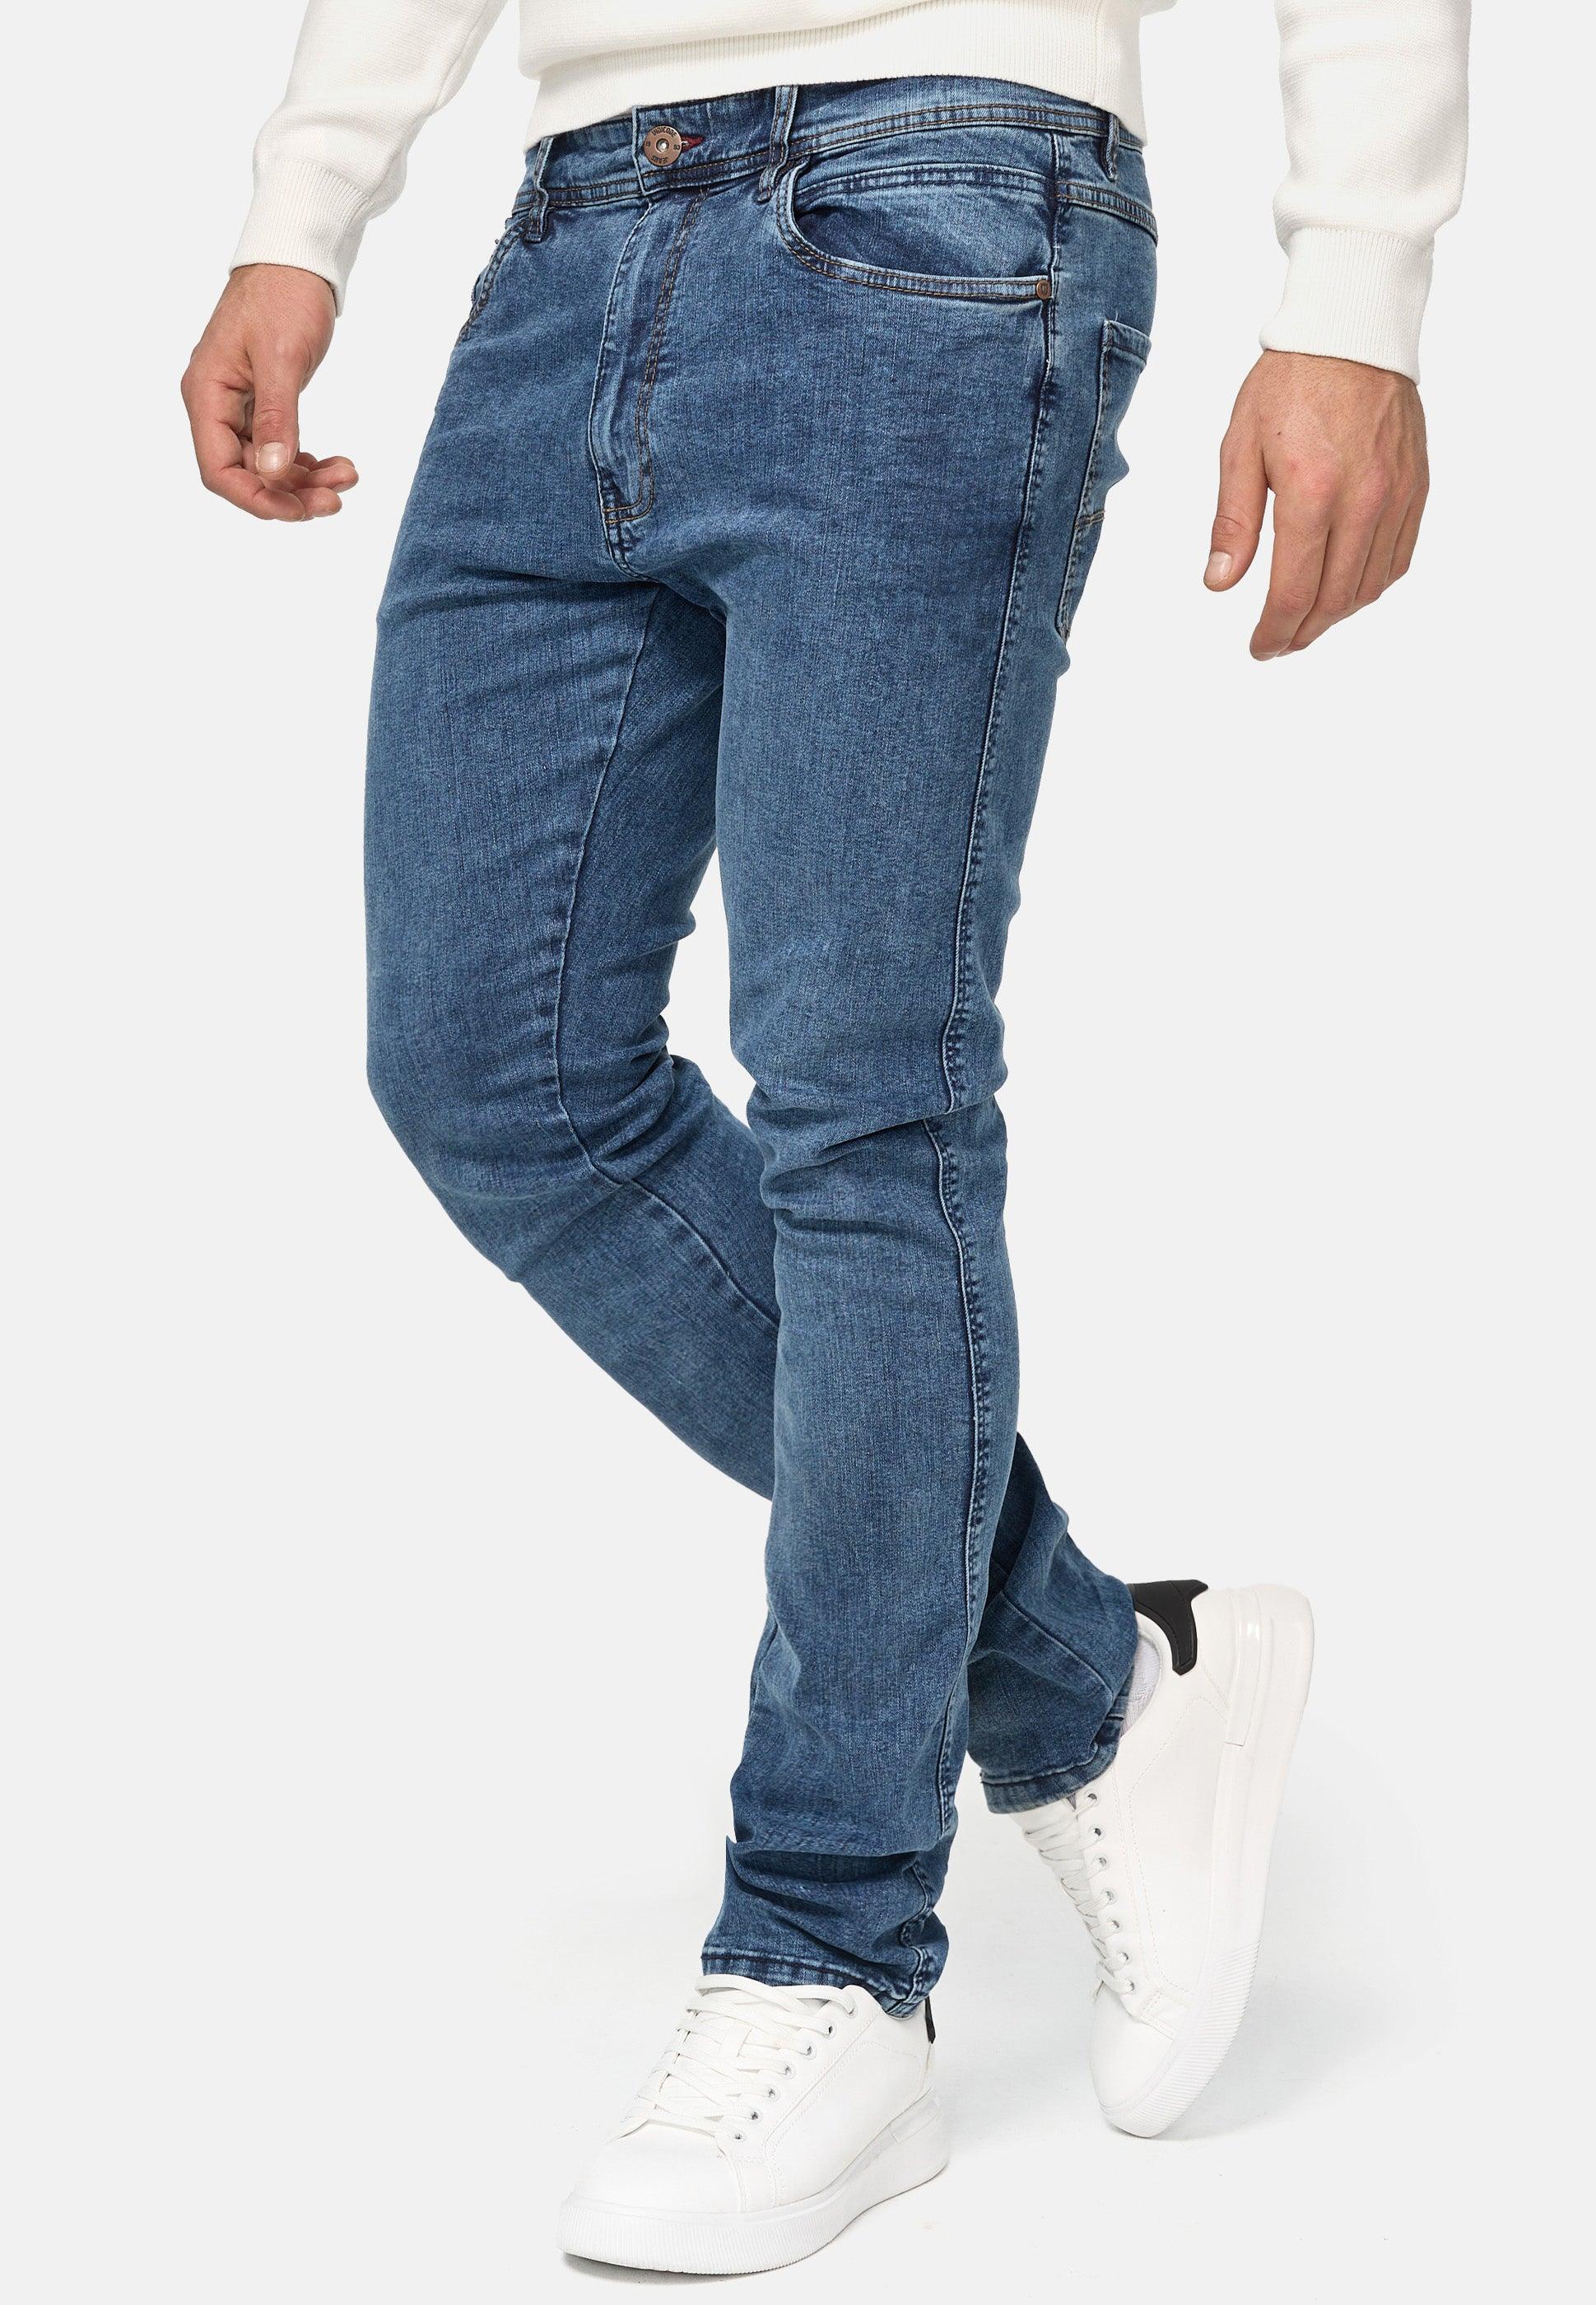 Jeans and Trousers Spring Summer Shop Online  PaulShark